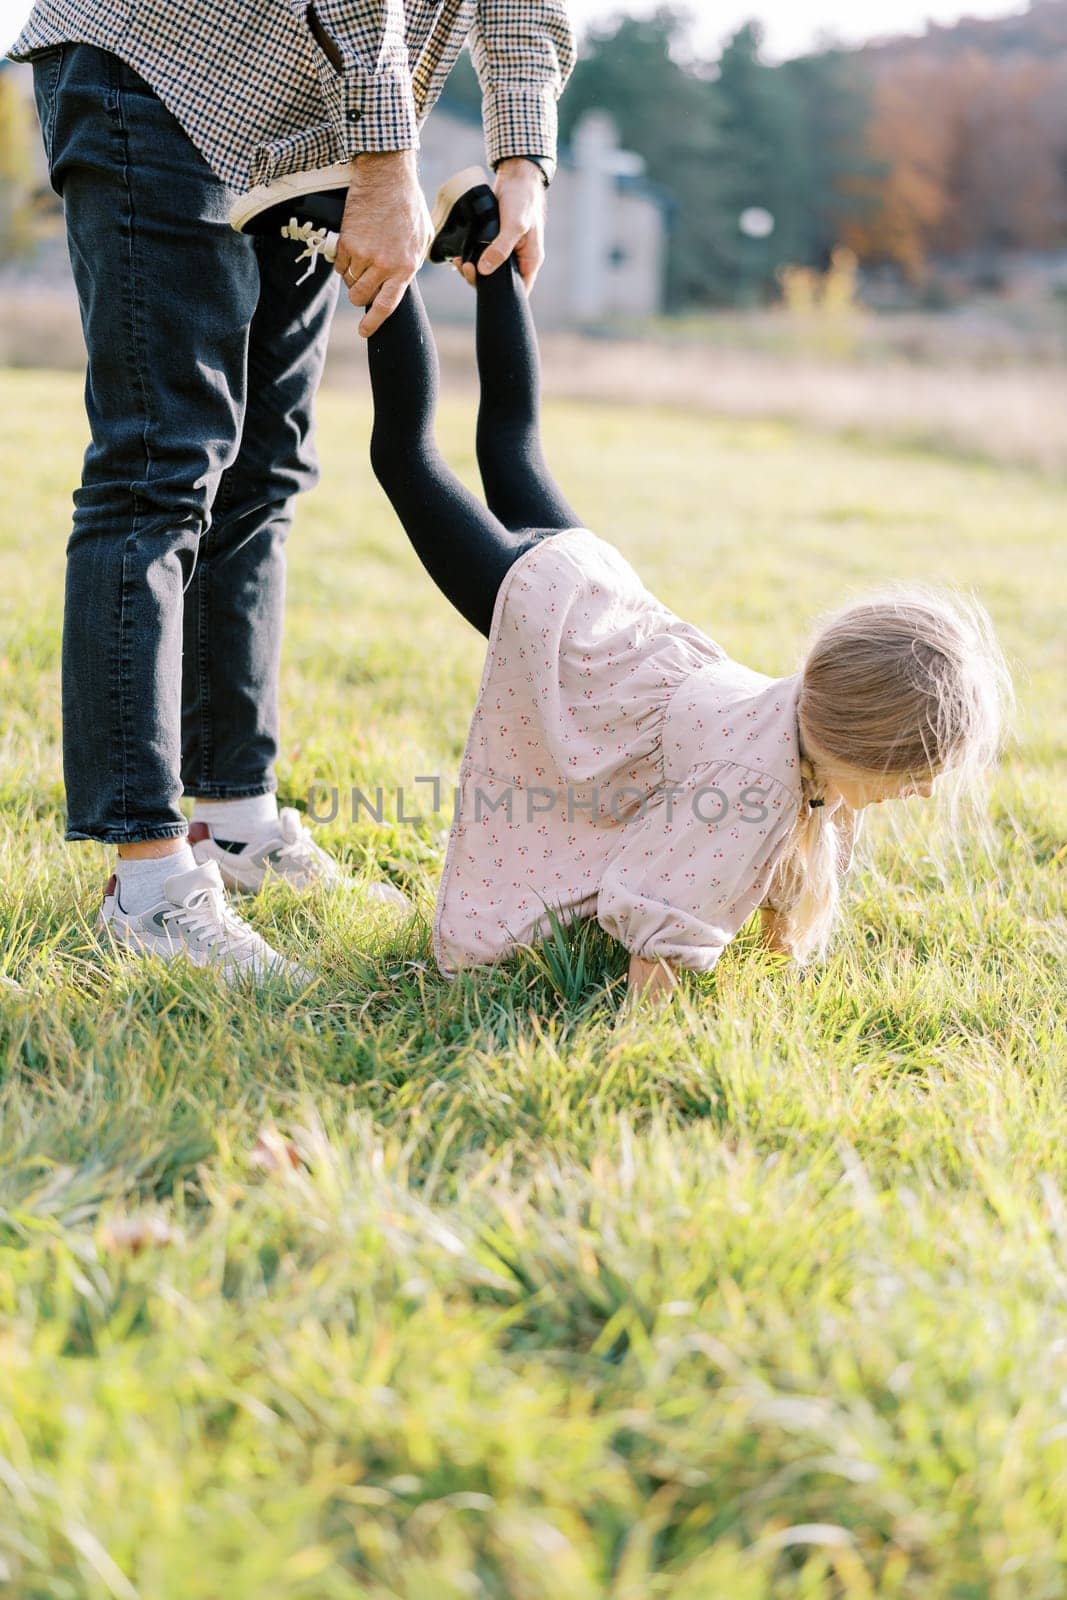 Dad holds the legs of a little girl walking on her hands along the green lawn. Cropped by Nadtochiy